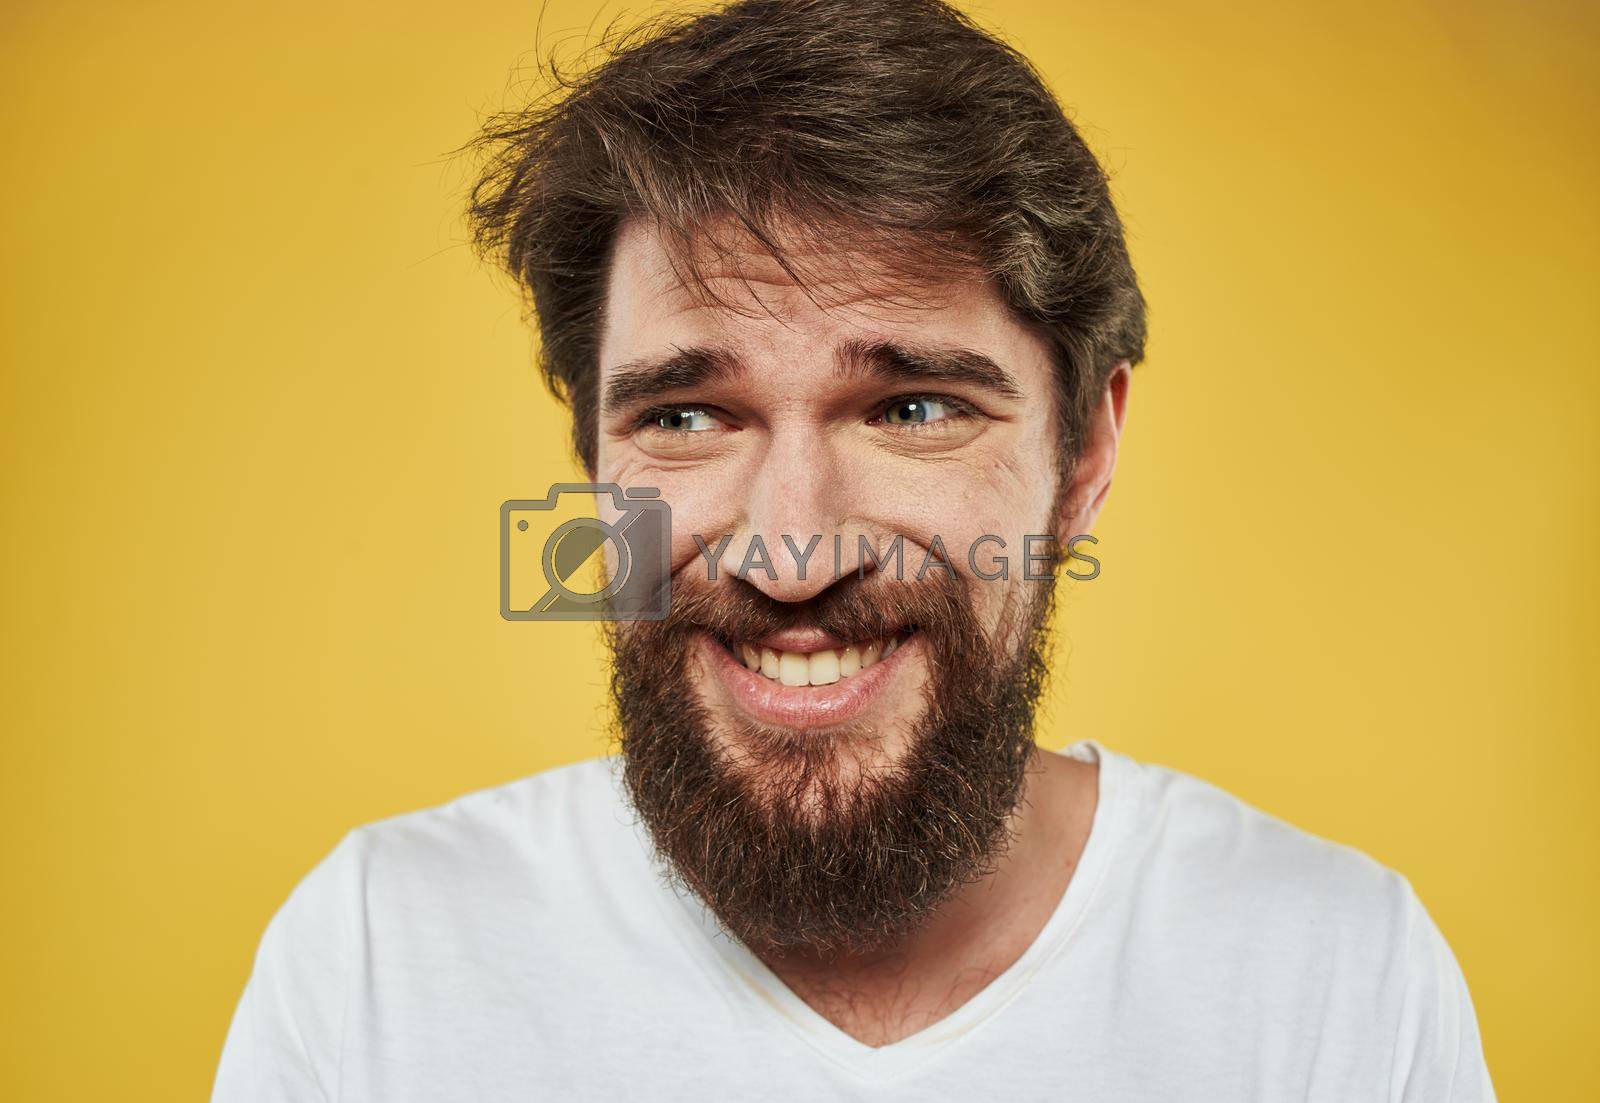 Royalty free image of Emotional man with thick beard grinning model yellow background by SHOTPRIME